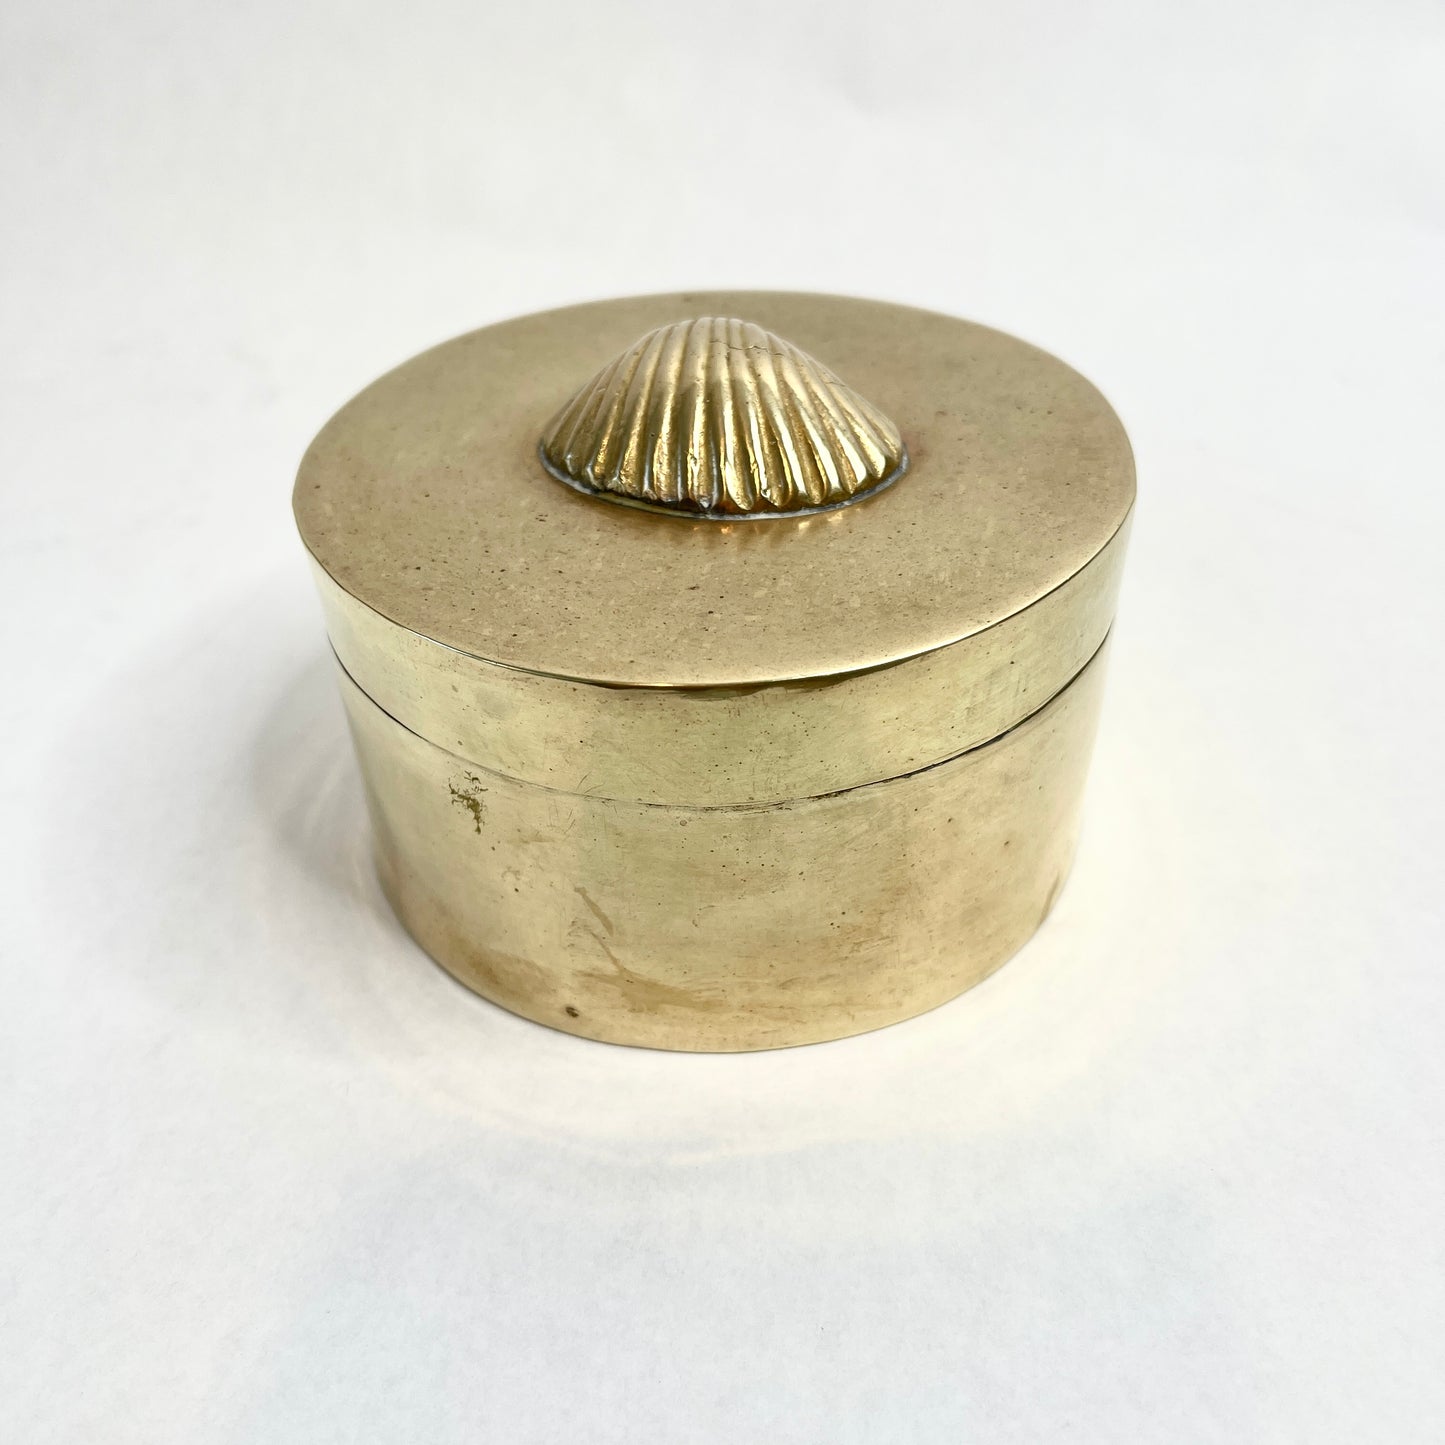 Vintage Brass Box Round with Scallop Shell